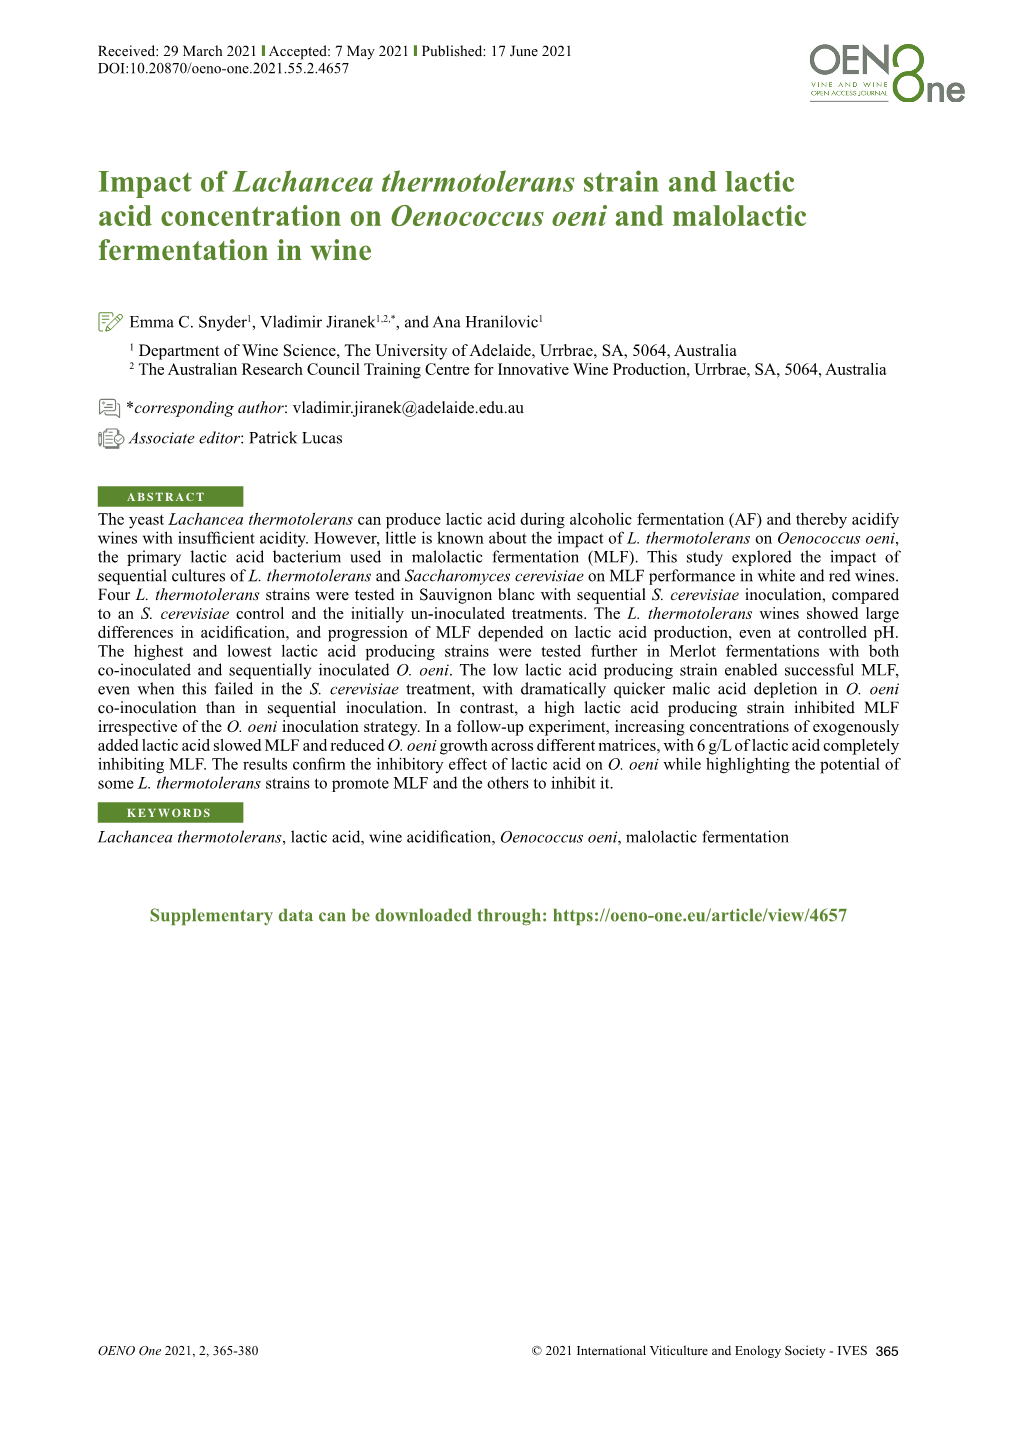 Impact of Lachancea Thermotolerans Strain and Lactic Acid Concentration on Oenococcus Oeni and Malolactic Fermentation in Wine